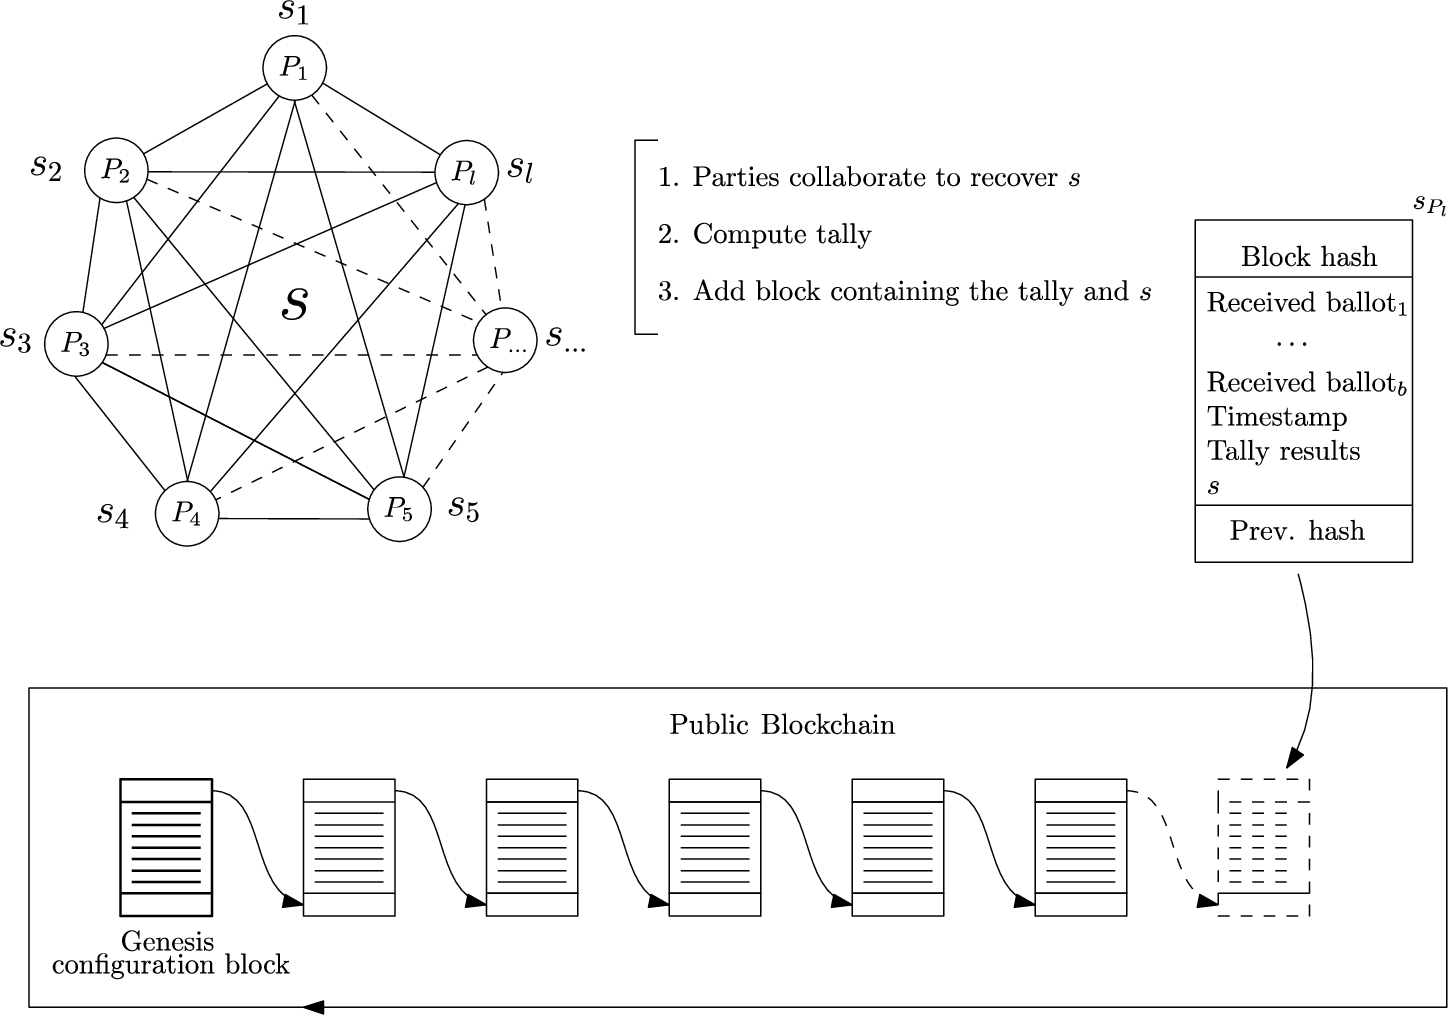 Parties collaborate to recover the private key s. Then, each of them individually computes a personal tally and adds it to the blockchain. It contains all the information needed by a third party to audit the tally.